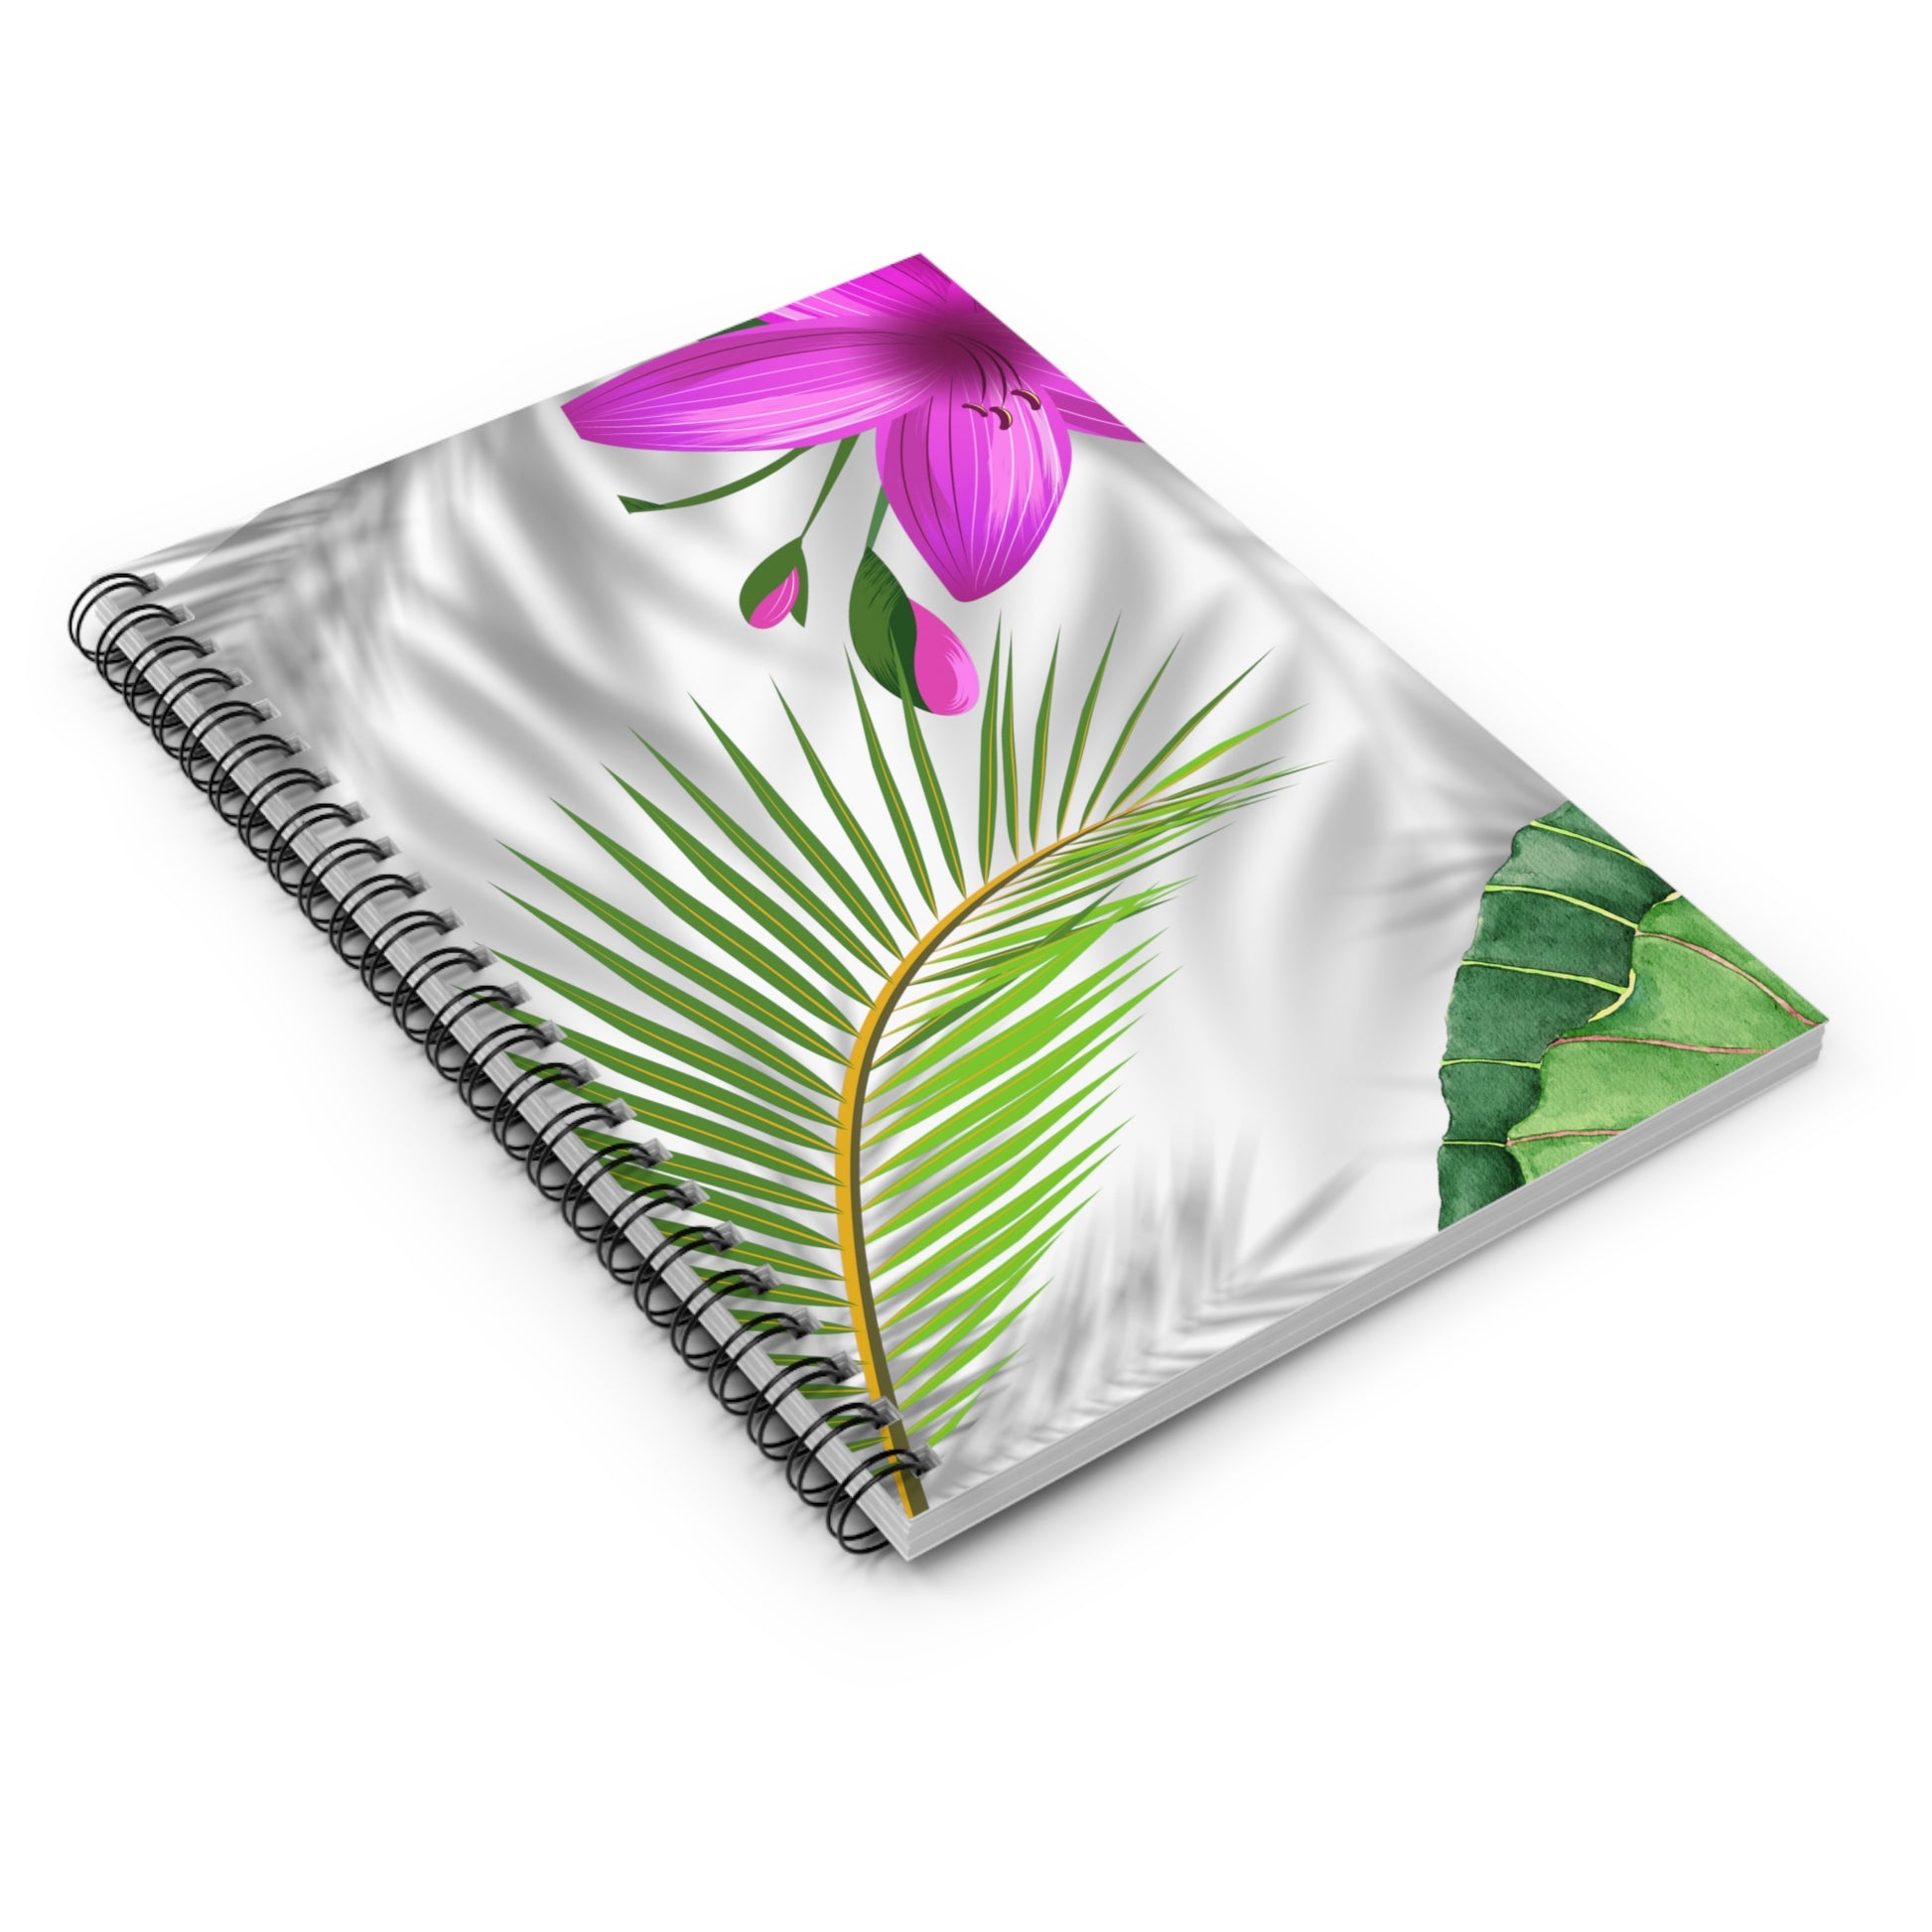 Flora: Spiral Notebook - Log Books - Journals - Diaries - and More Custom Printed by TheGlassyLass